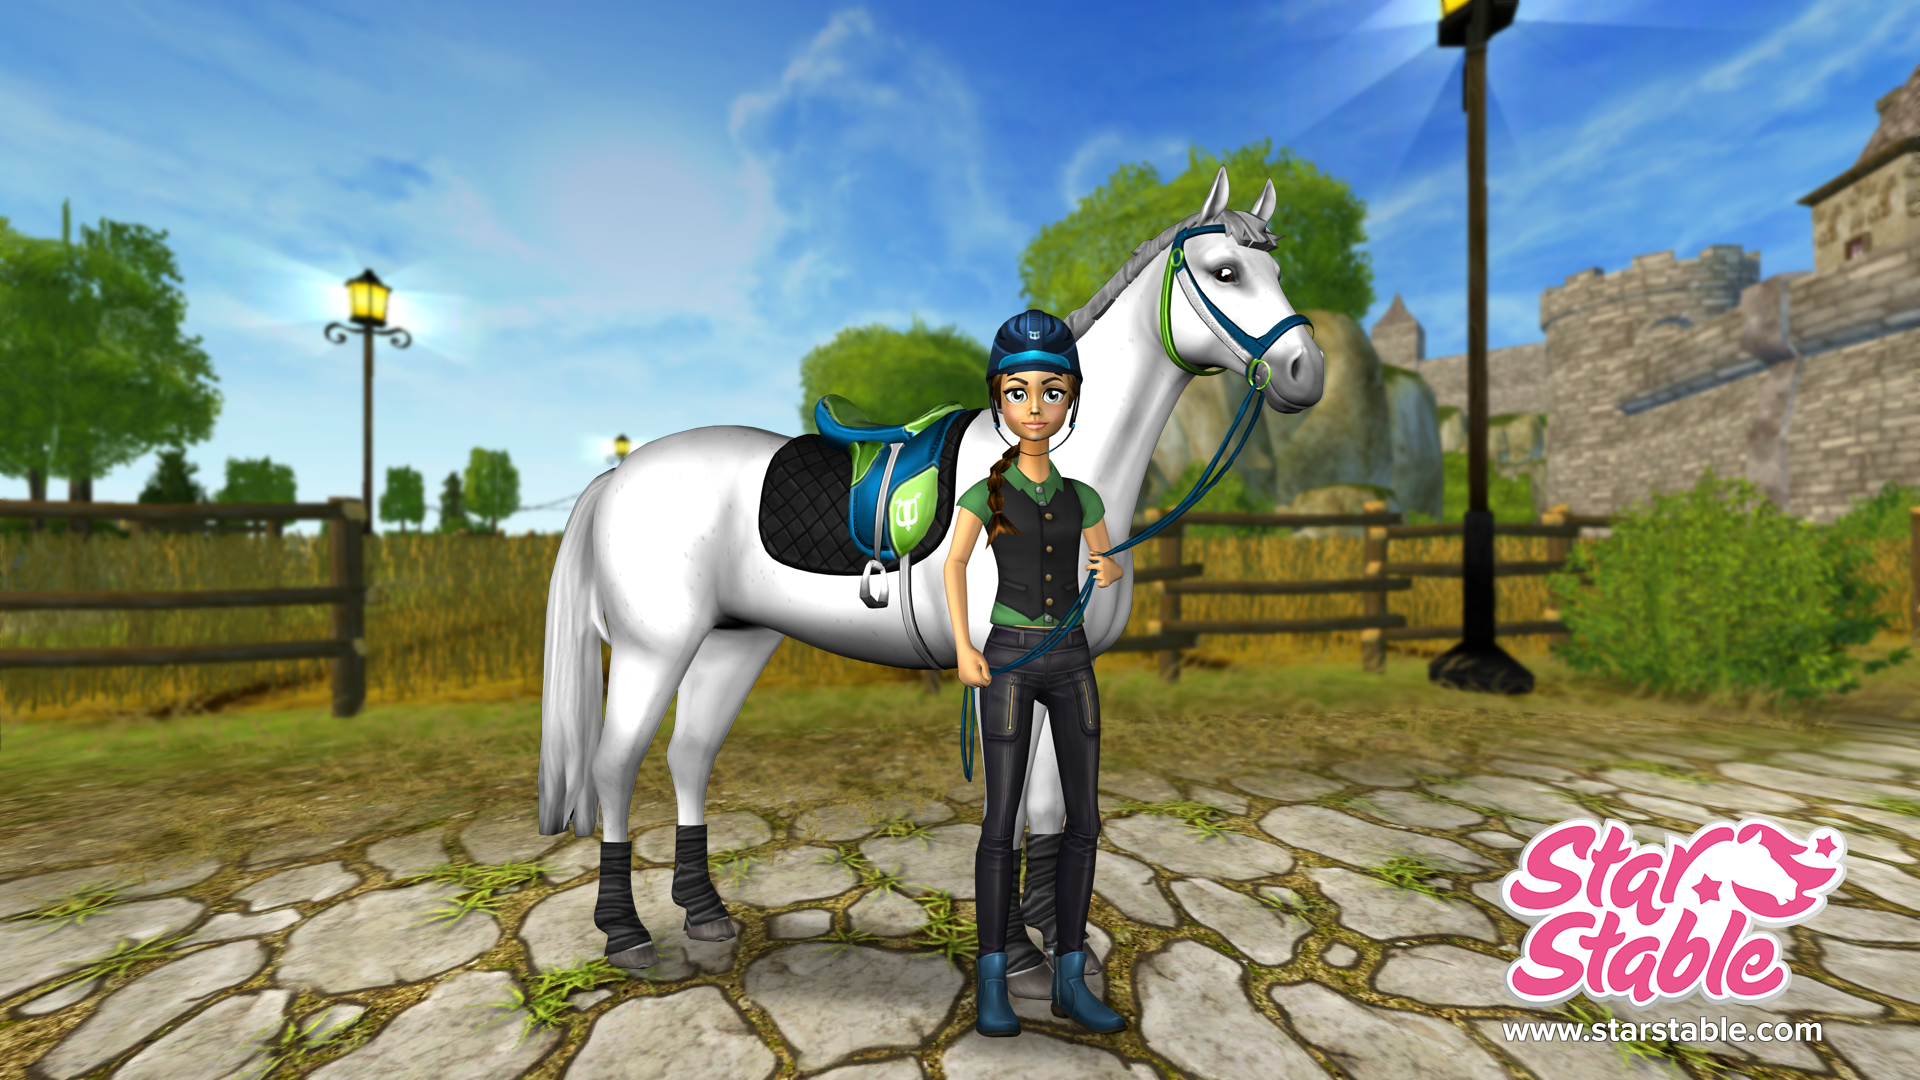 Star stable codes powered by wiki